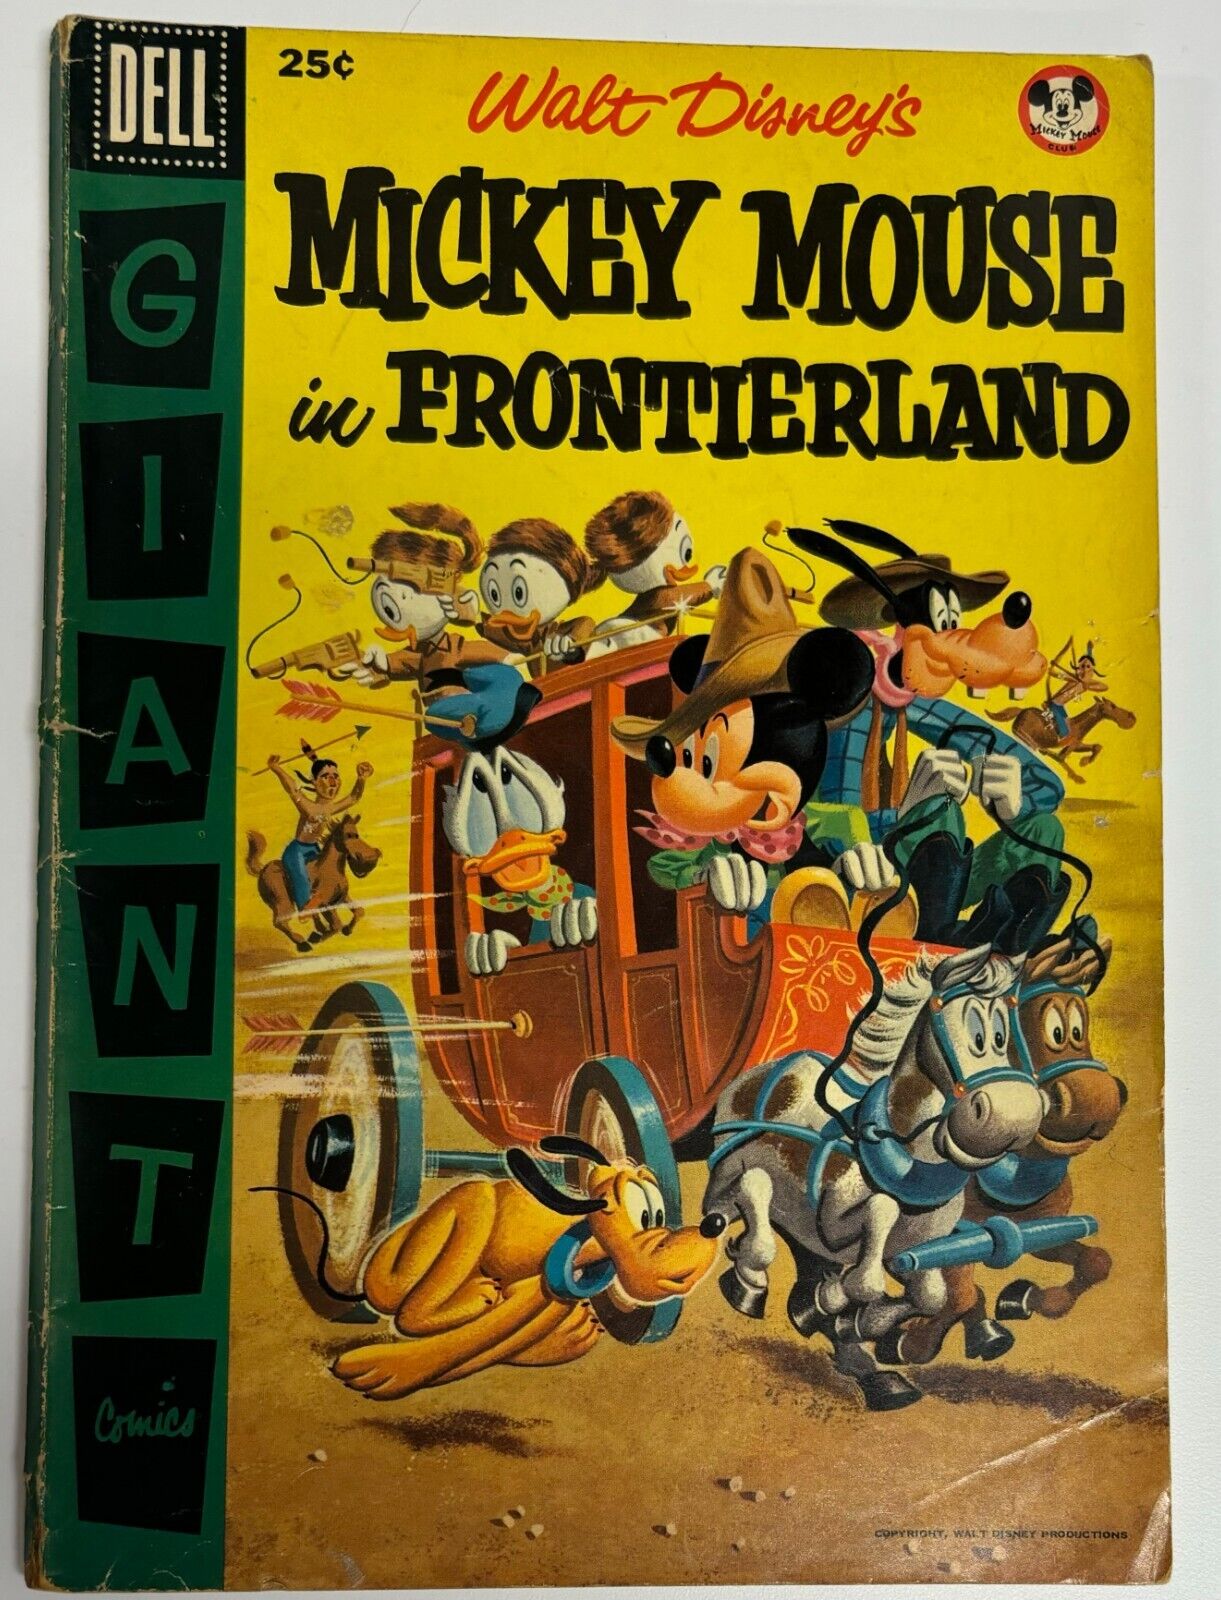 1956 Dell Giant Comic Mickey Mouse in Frontierland No. 1 #1 Silver Age Disney